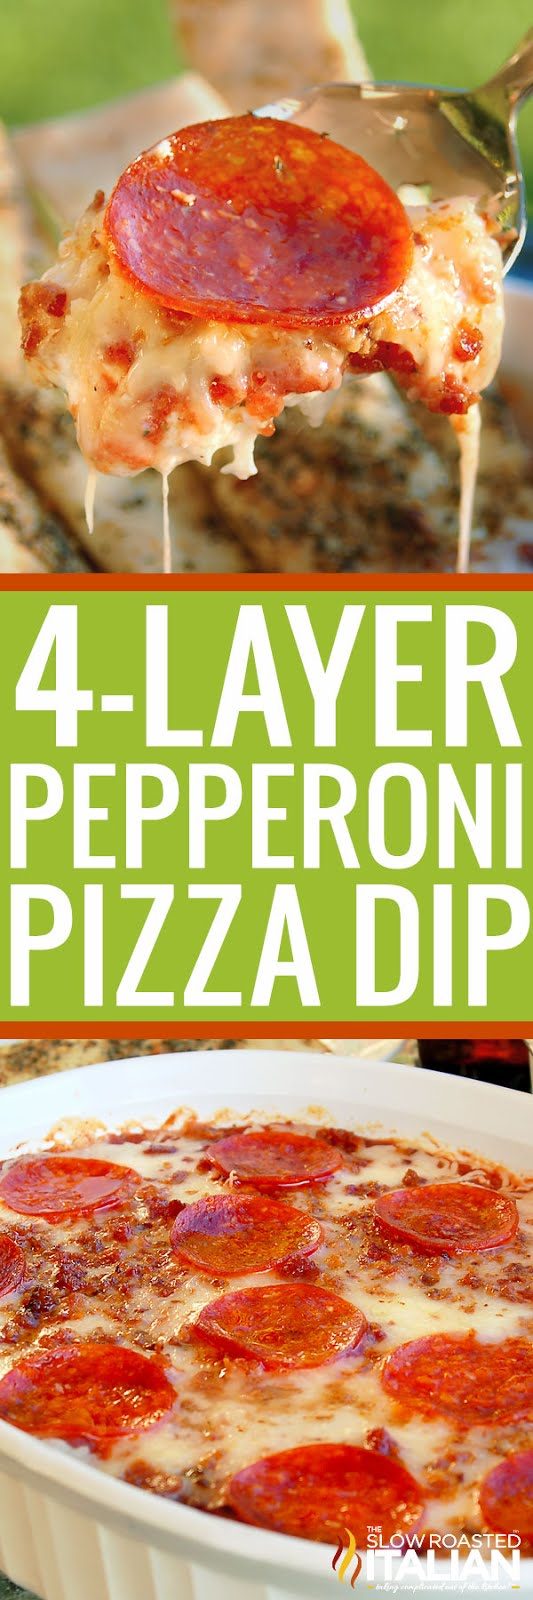 four-layer-pepperoni-pizza-dip-pin-9894545